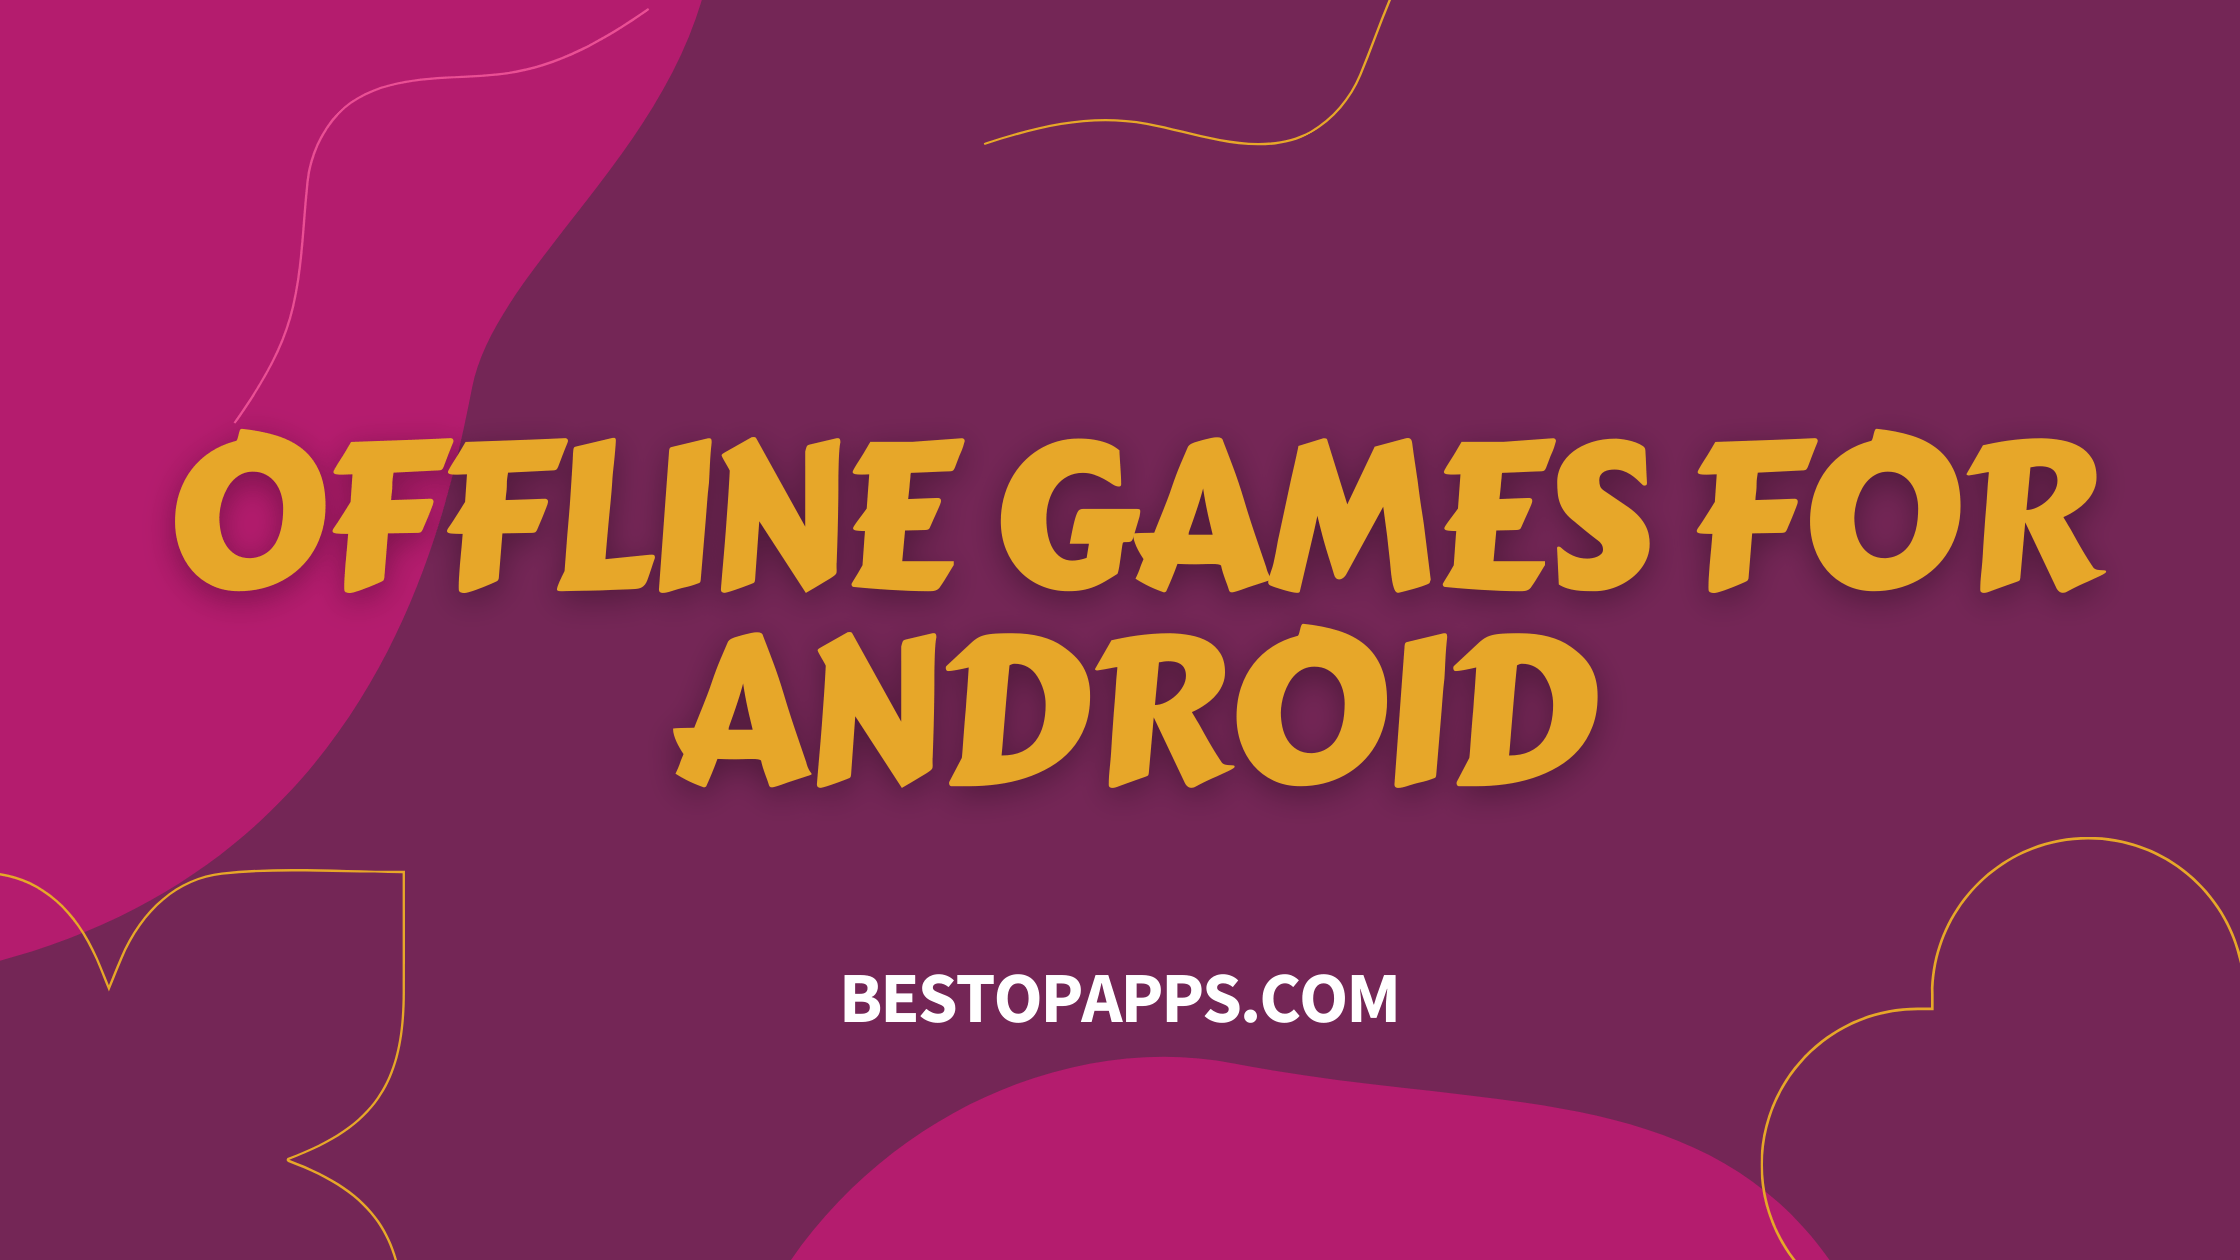 OFFLINE GAMES FOR ANDROID